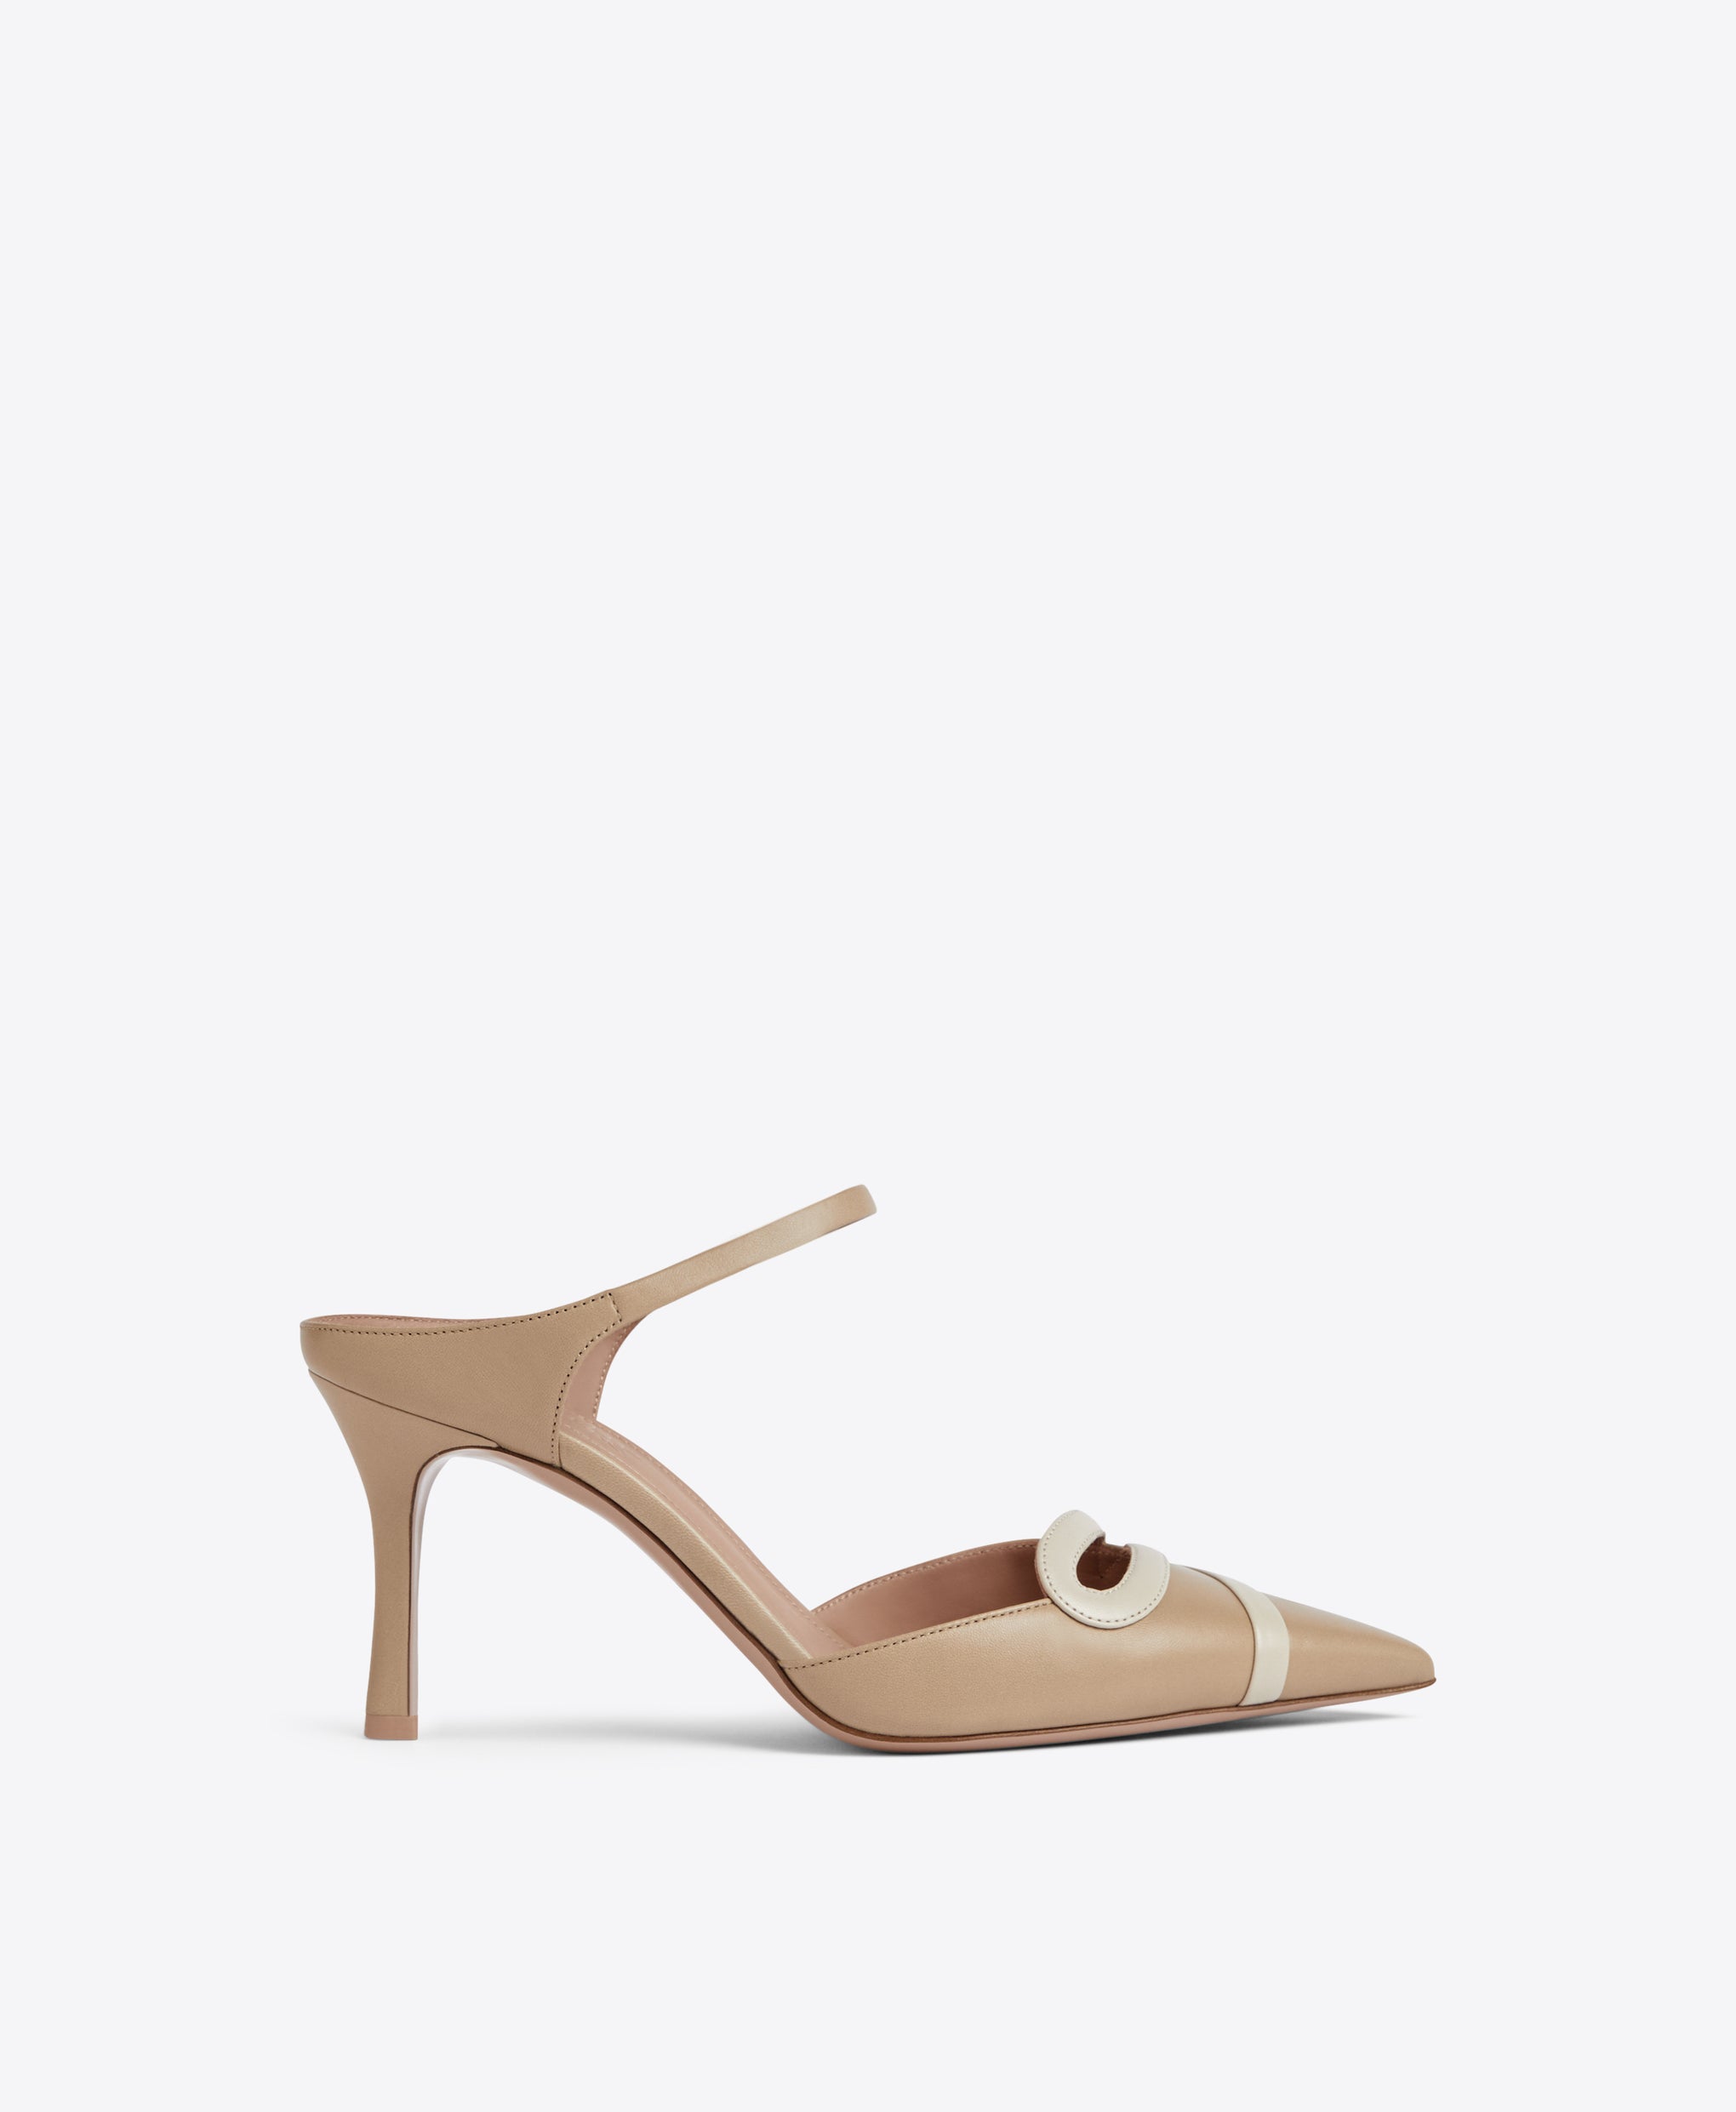 Malone Souliers Bonnie 80 Camel Leather Heeled Mules